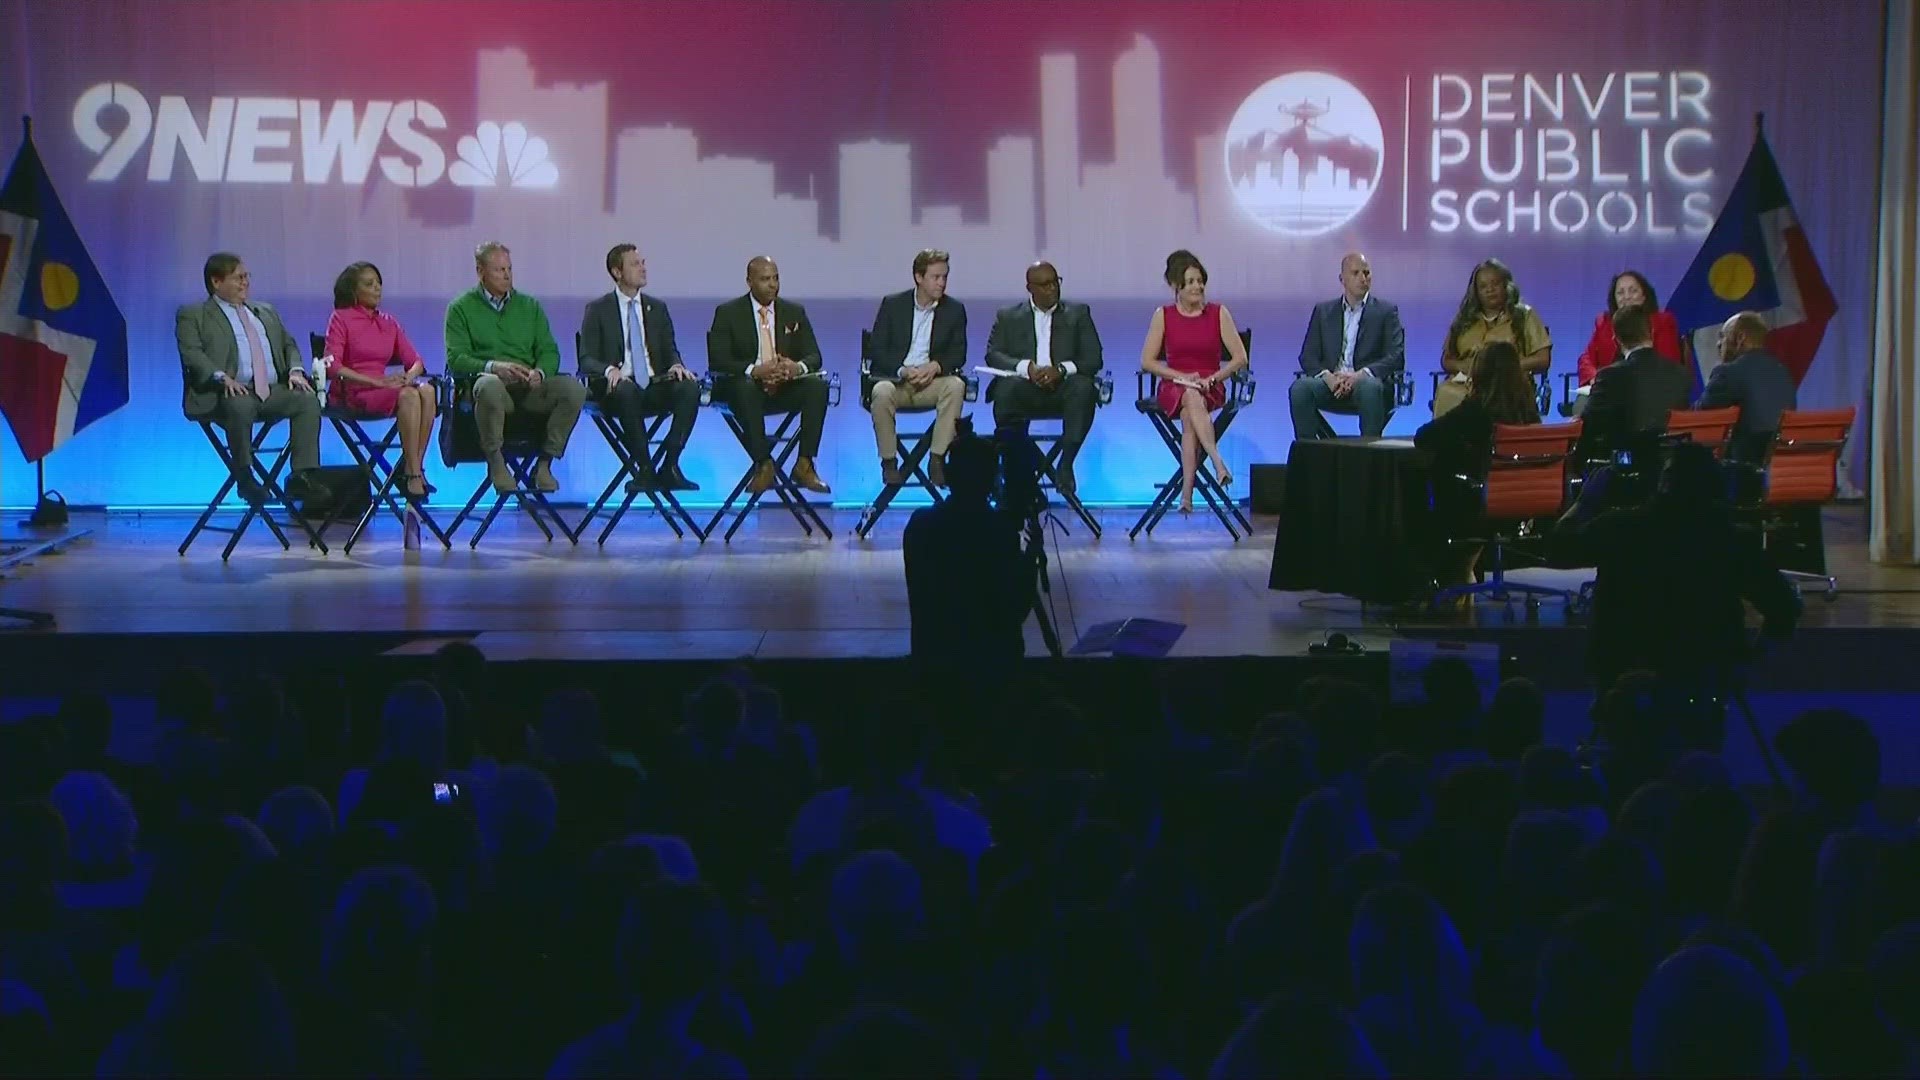 Eleven of the 17 candidates for mayor were selected for this debate based on polling results.